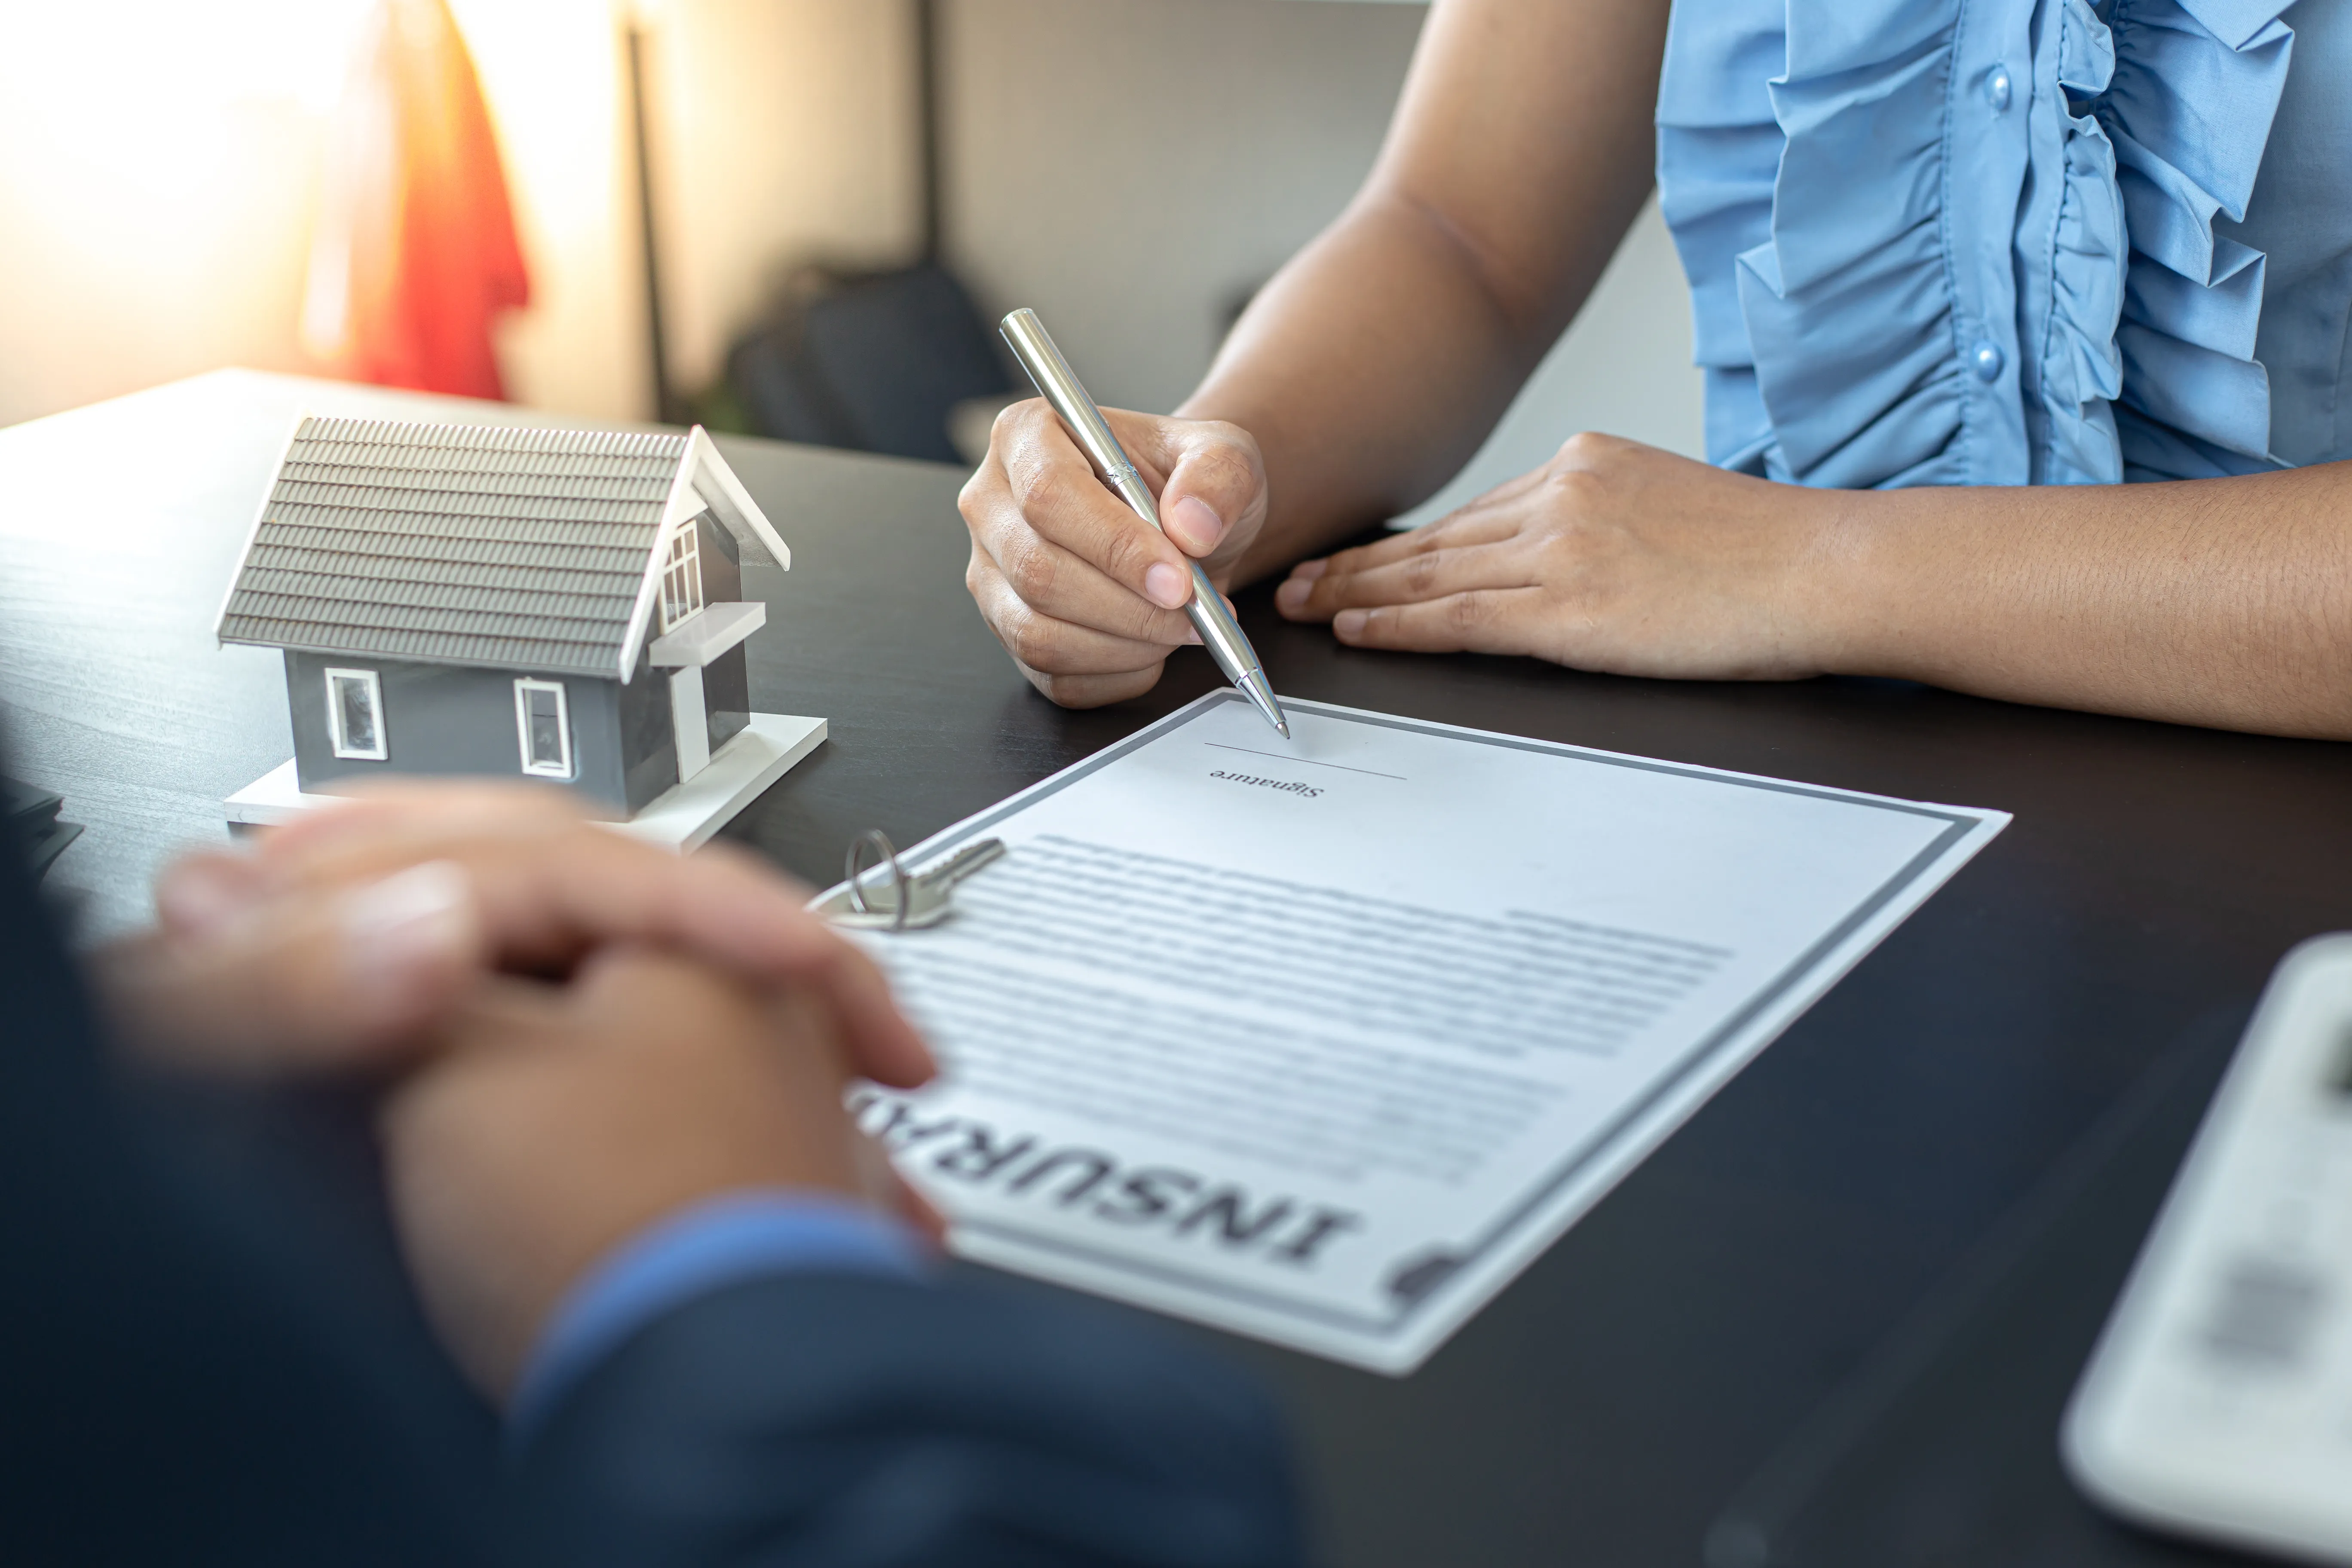 Insurance sales person closing an insurance contract with a client